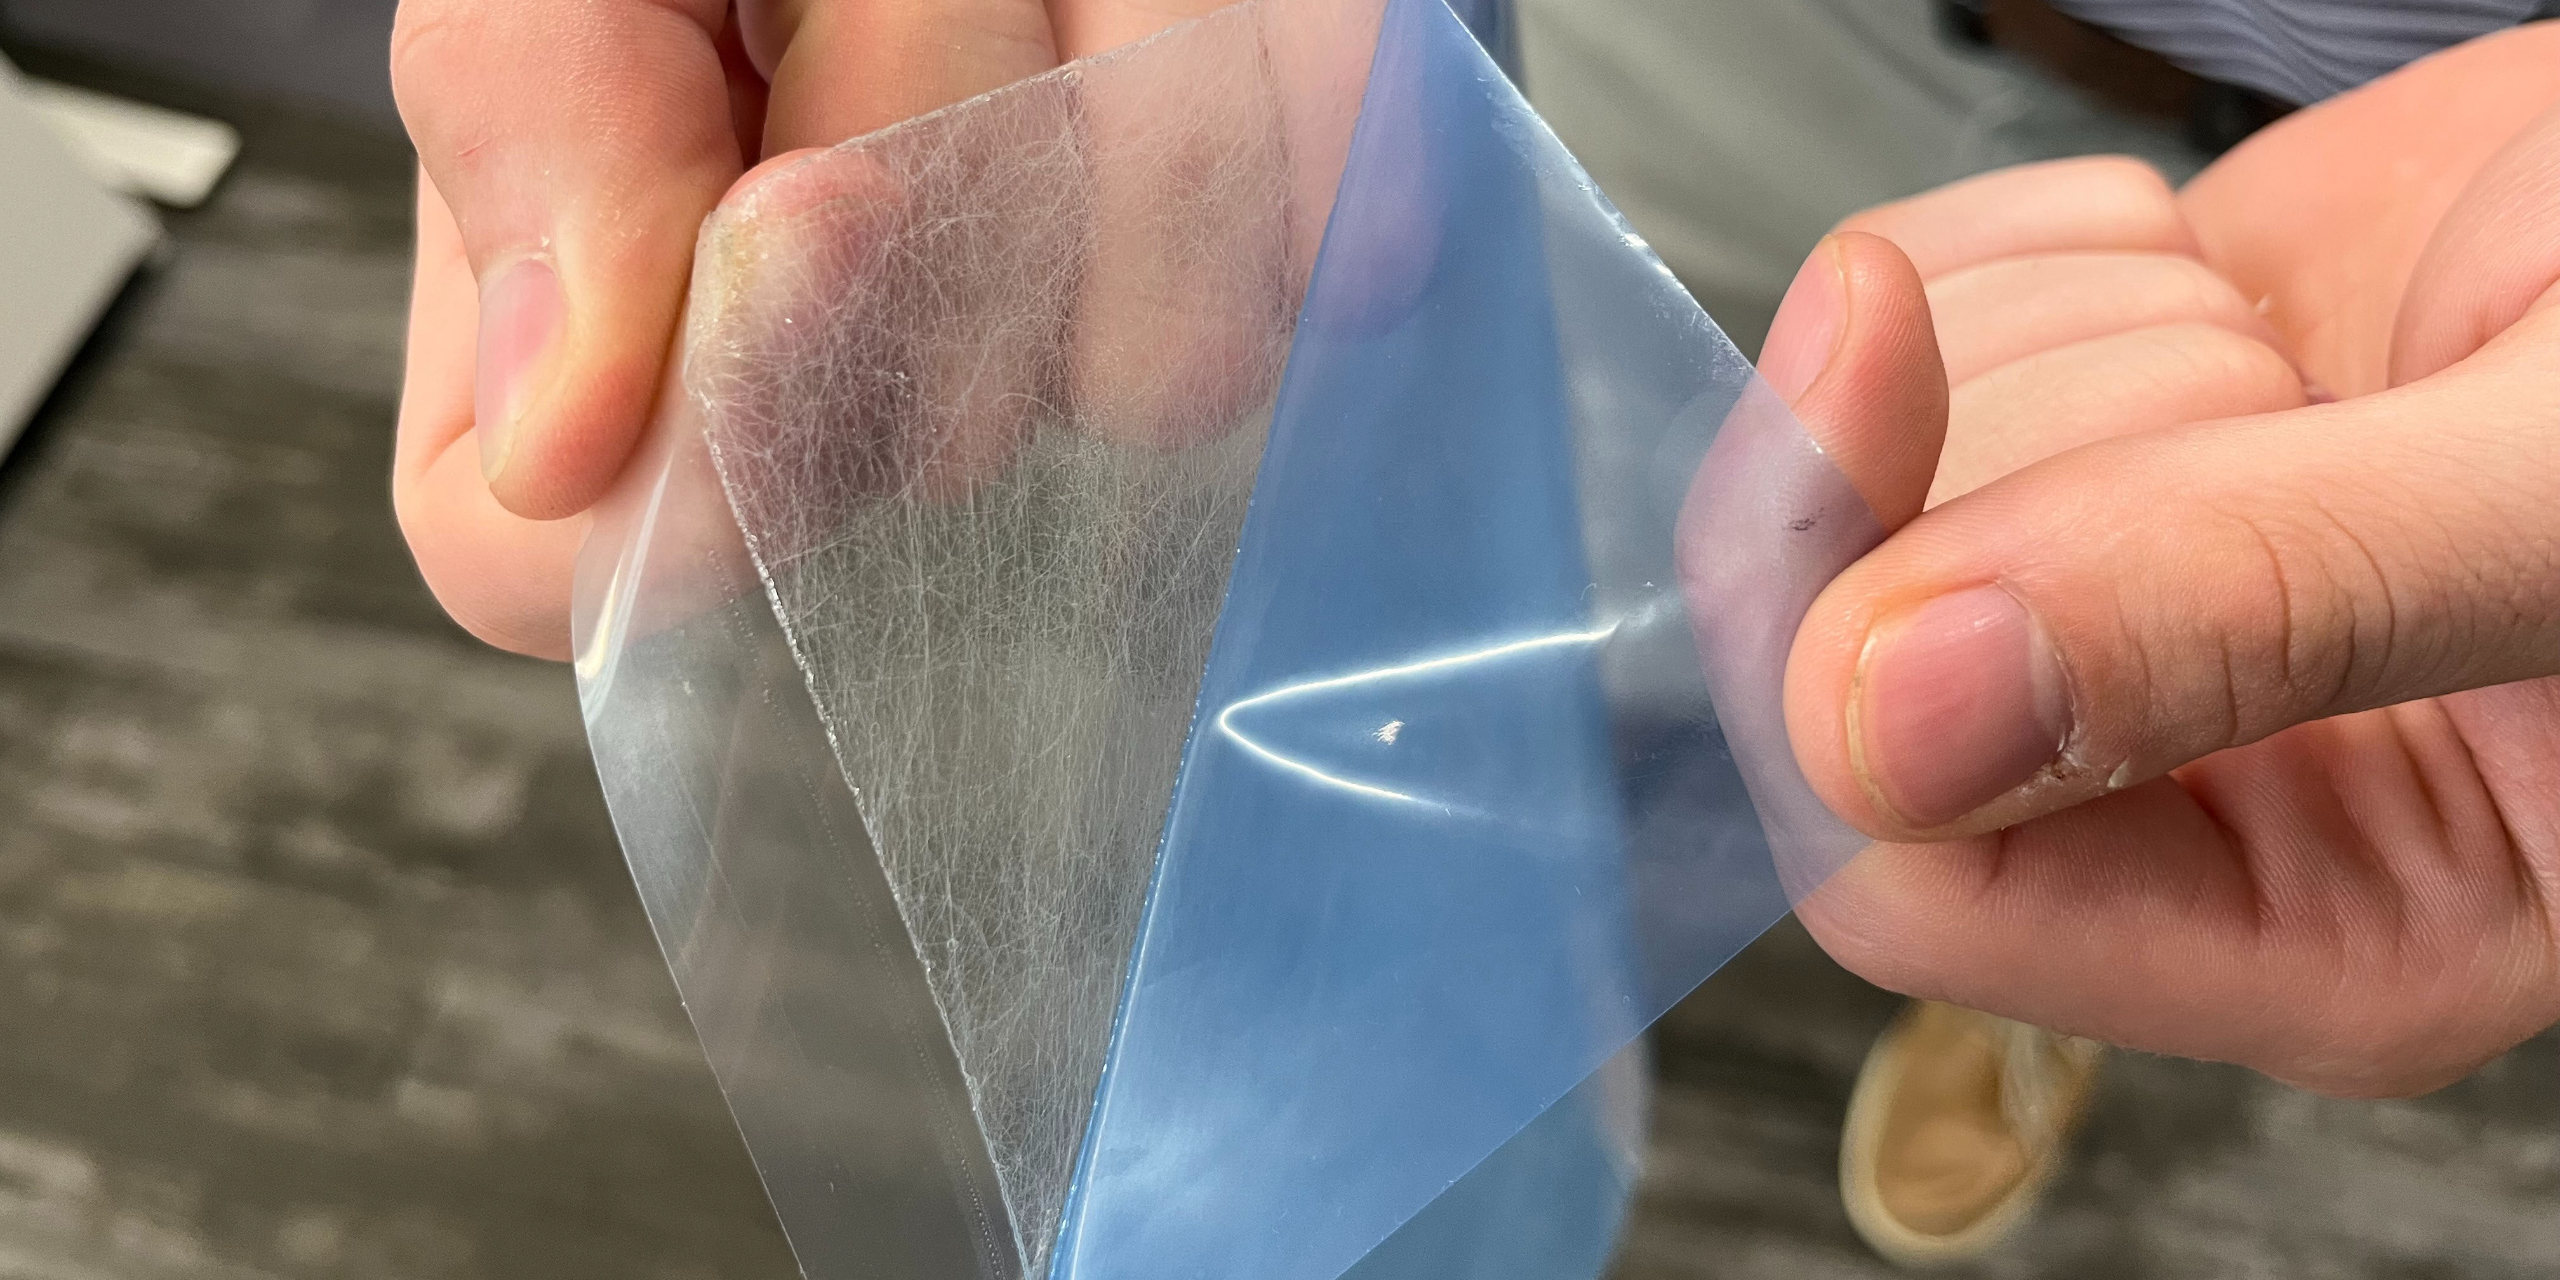 buying hydrogel sheets